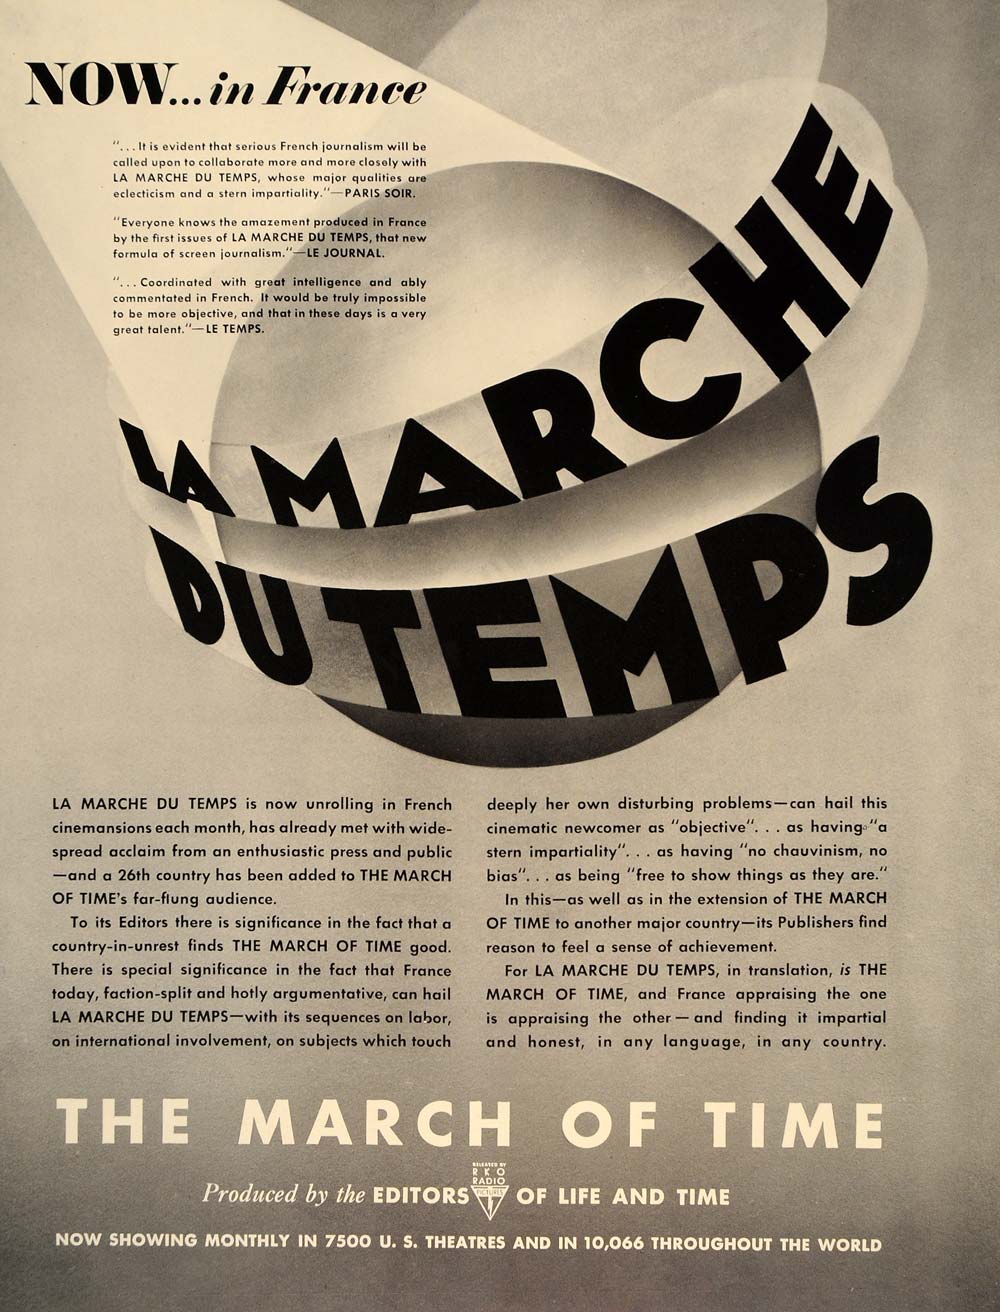 1937 Ad Marche du Temps March of Time Newsreel French - ORIGINAL ADVERTISING FT8